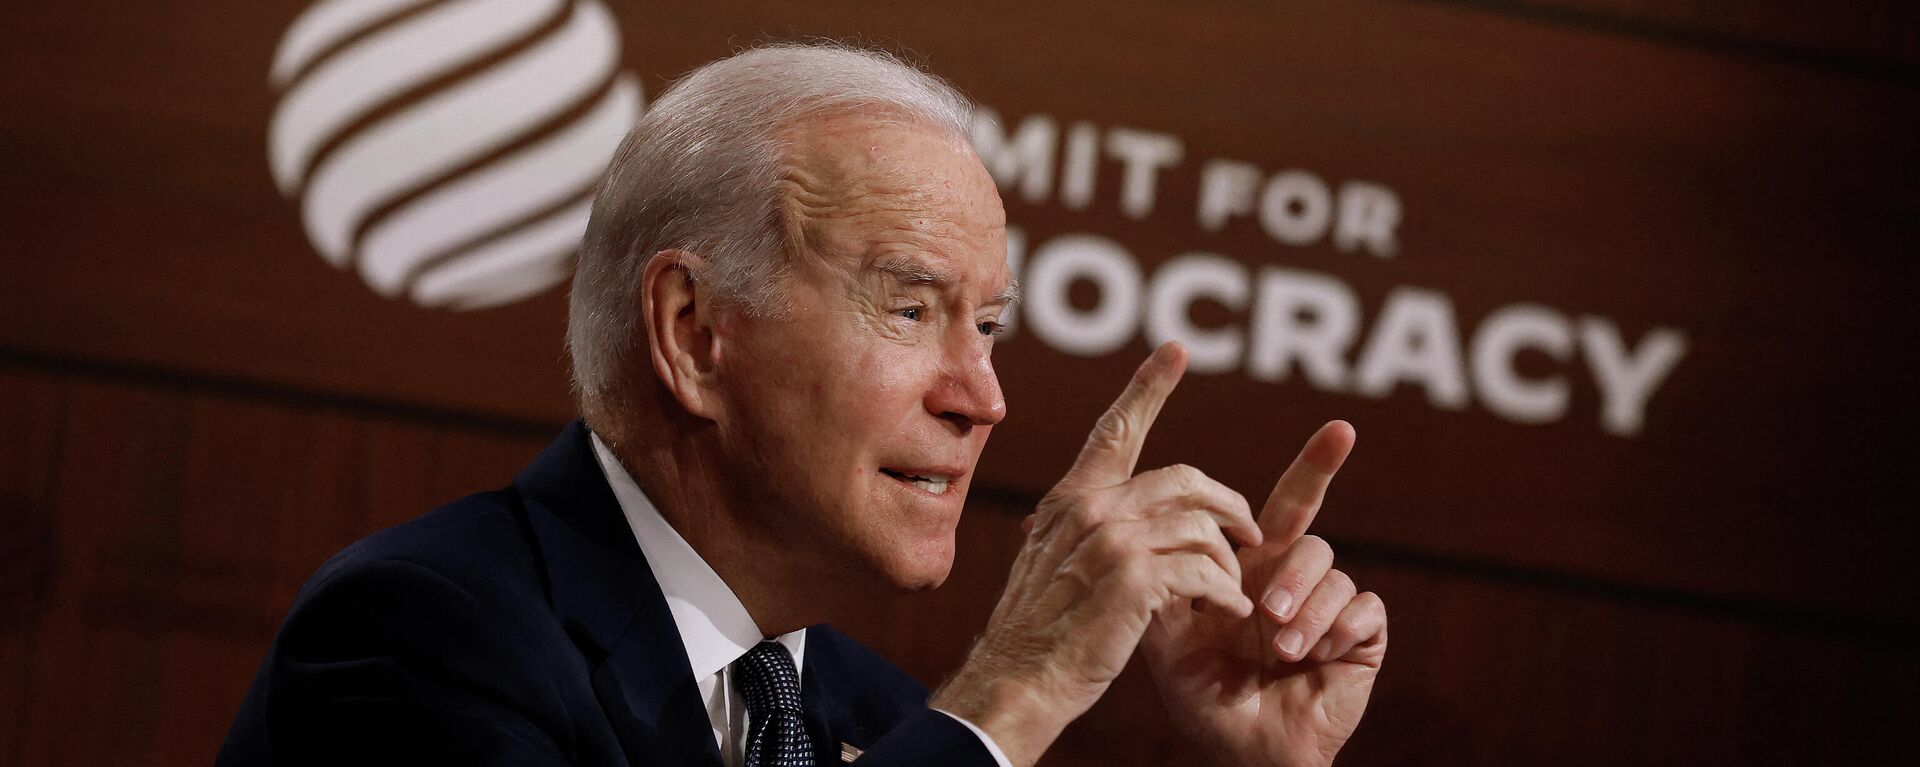 U.S. President Joe Biden delivers opening remarks for the virtual Summit for Democracy in the South Court Auditorium on December 09, 2021 in Washington, DC. - Sputnik International, 1920, 11.12.2021